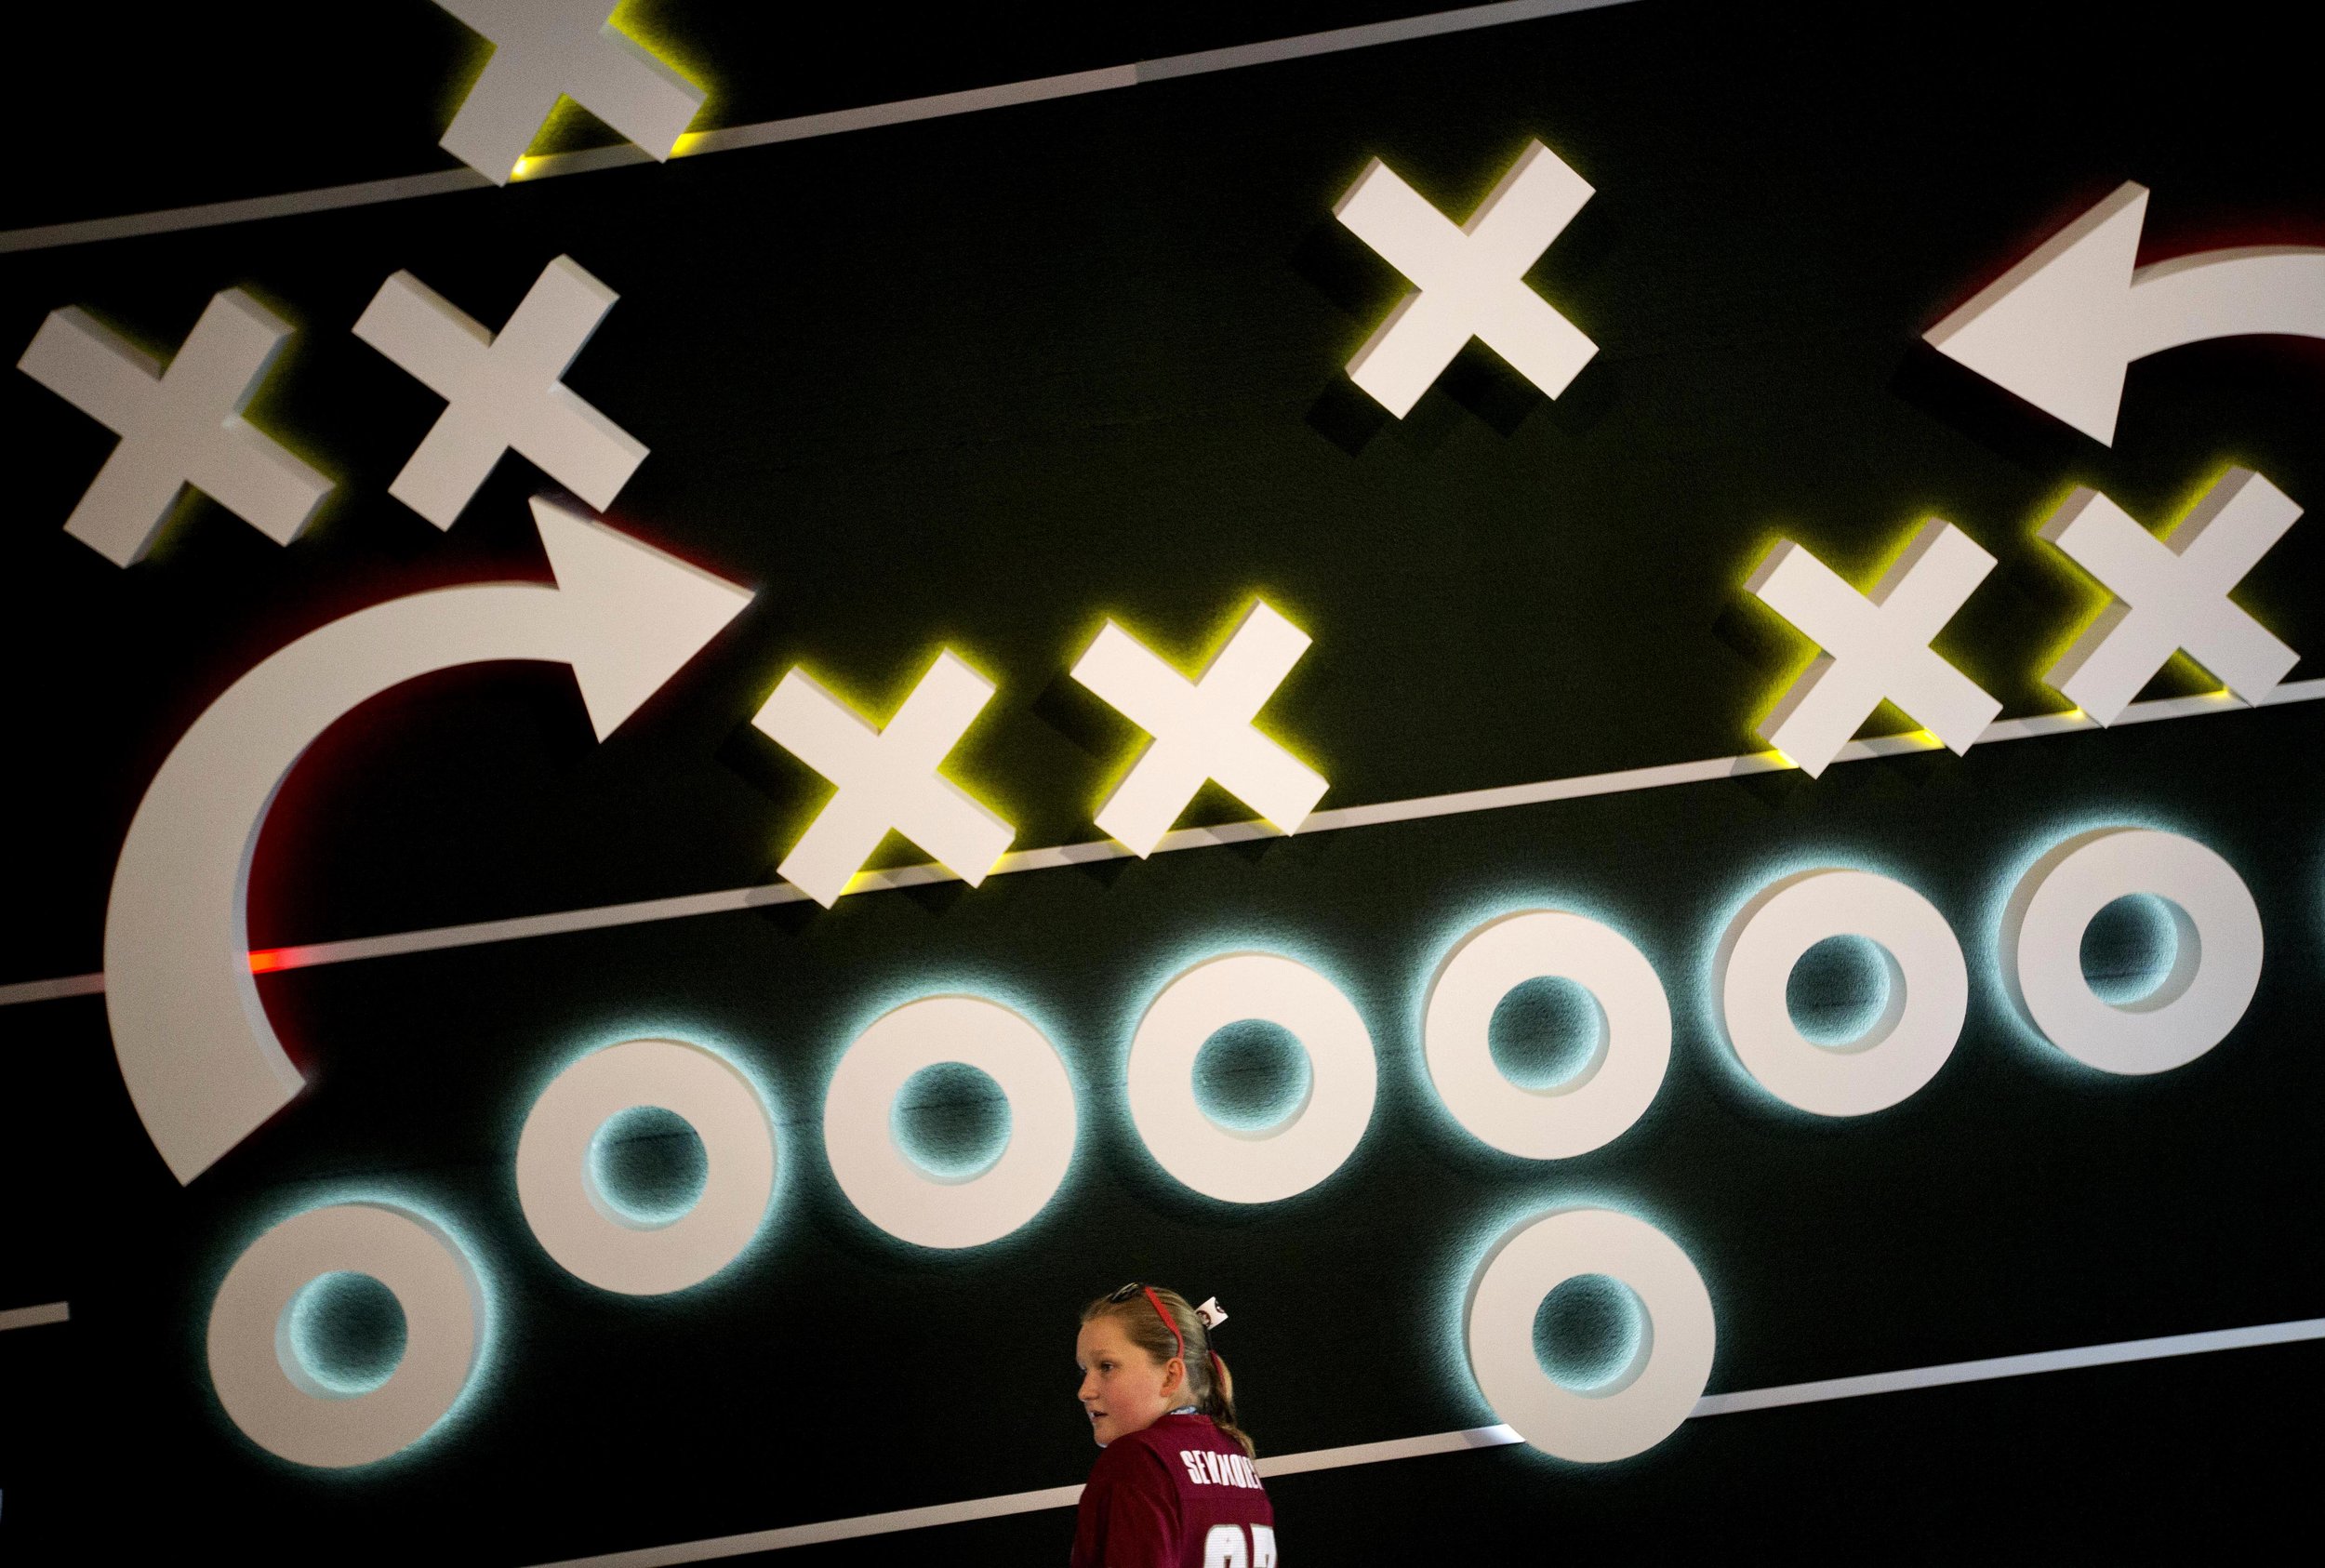  Klava Johnson, 12, of Dunwoody, Ga., stands in front of an interactive exhibit while touring the College Football Hall of Fame, Wednesday, Aug. 13, 2014, in Atlanta. Exhibits incuding a coaching video tutorial help explain how a play is constructed 